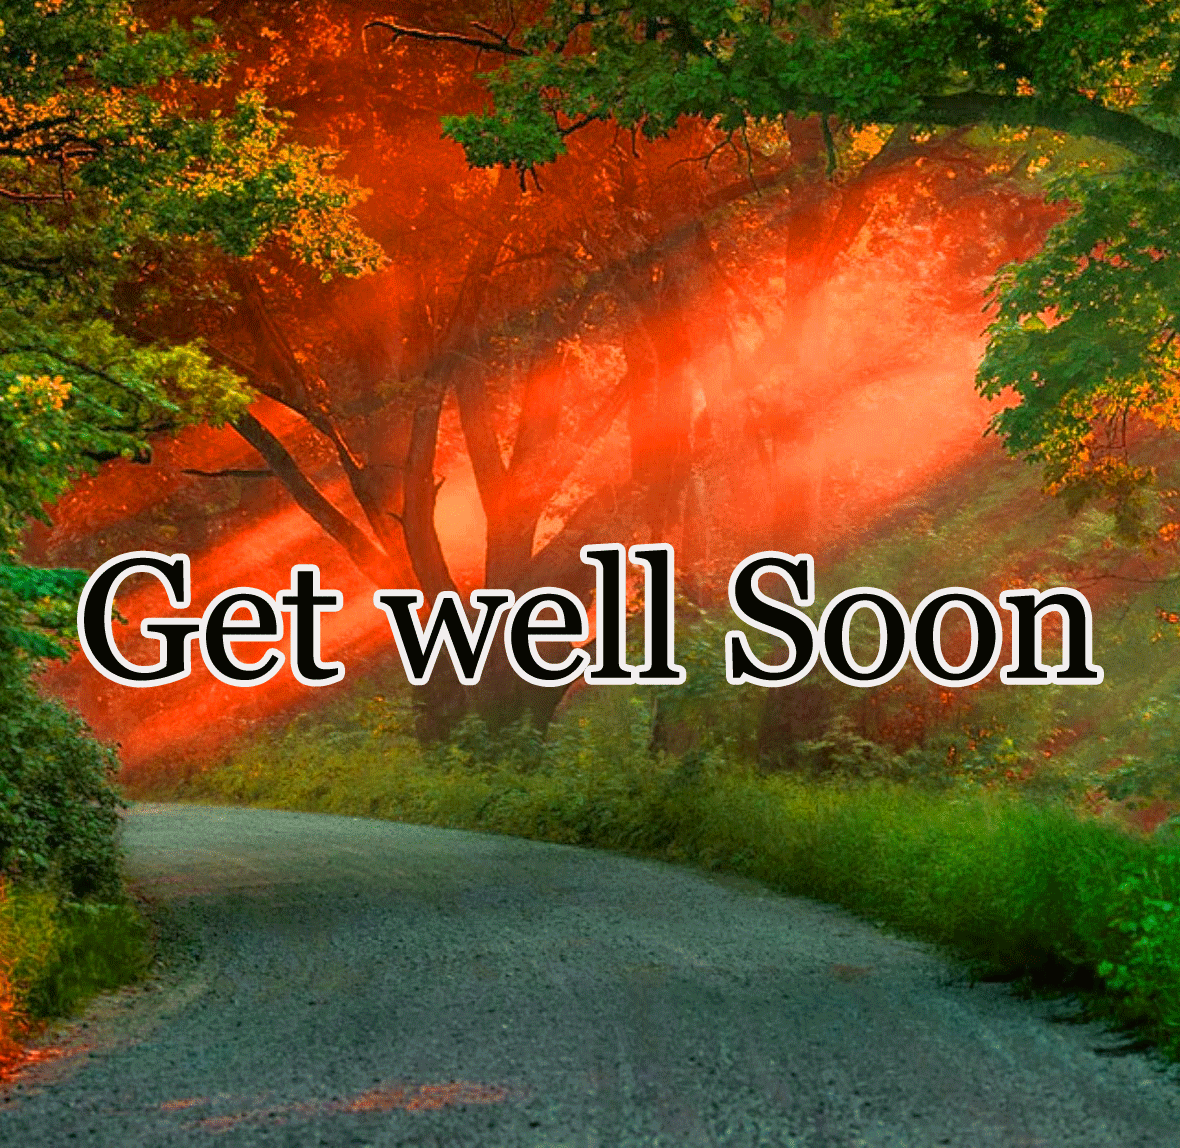 get well soon pics HD download , get well soon image , get well soon